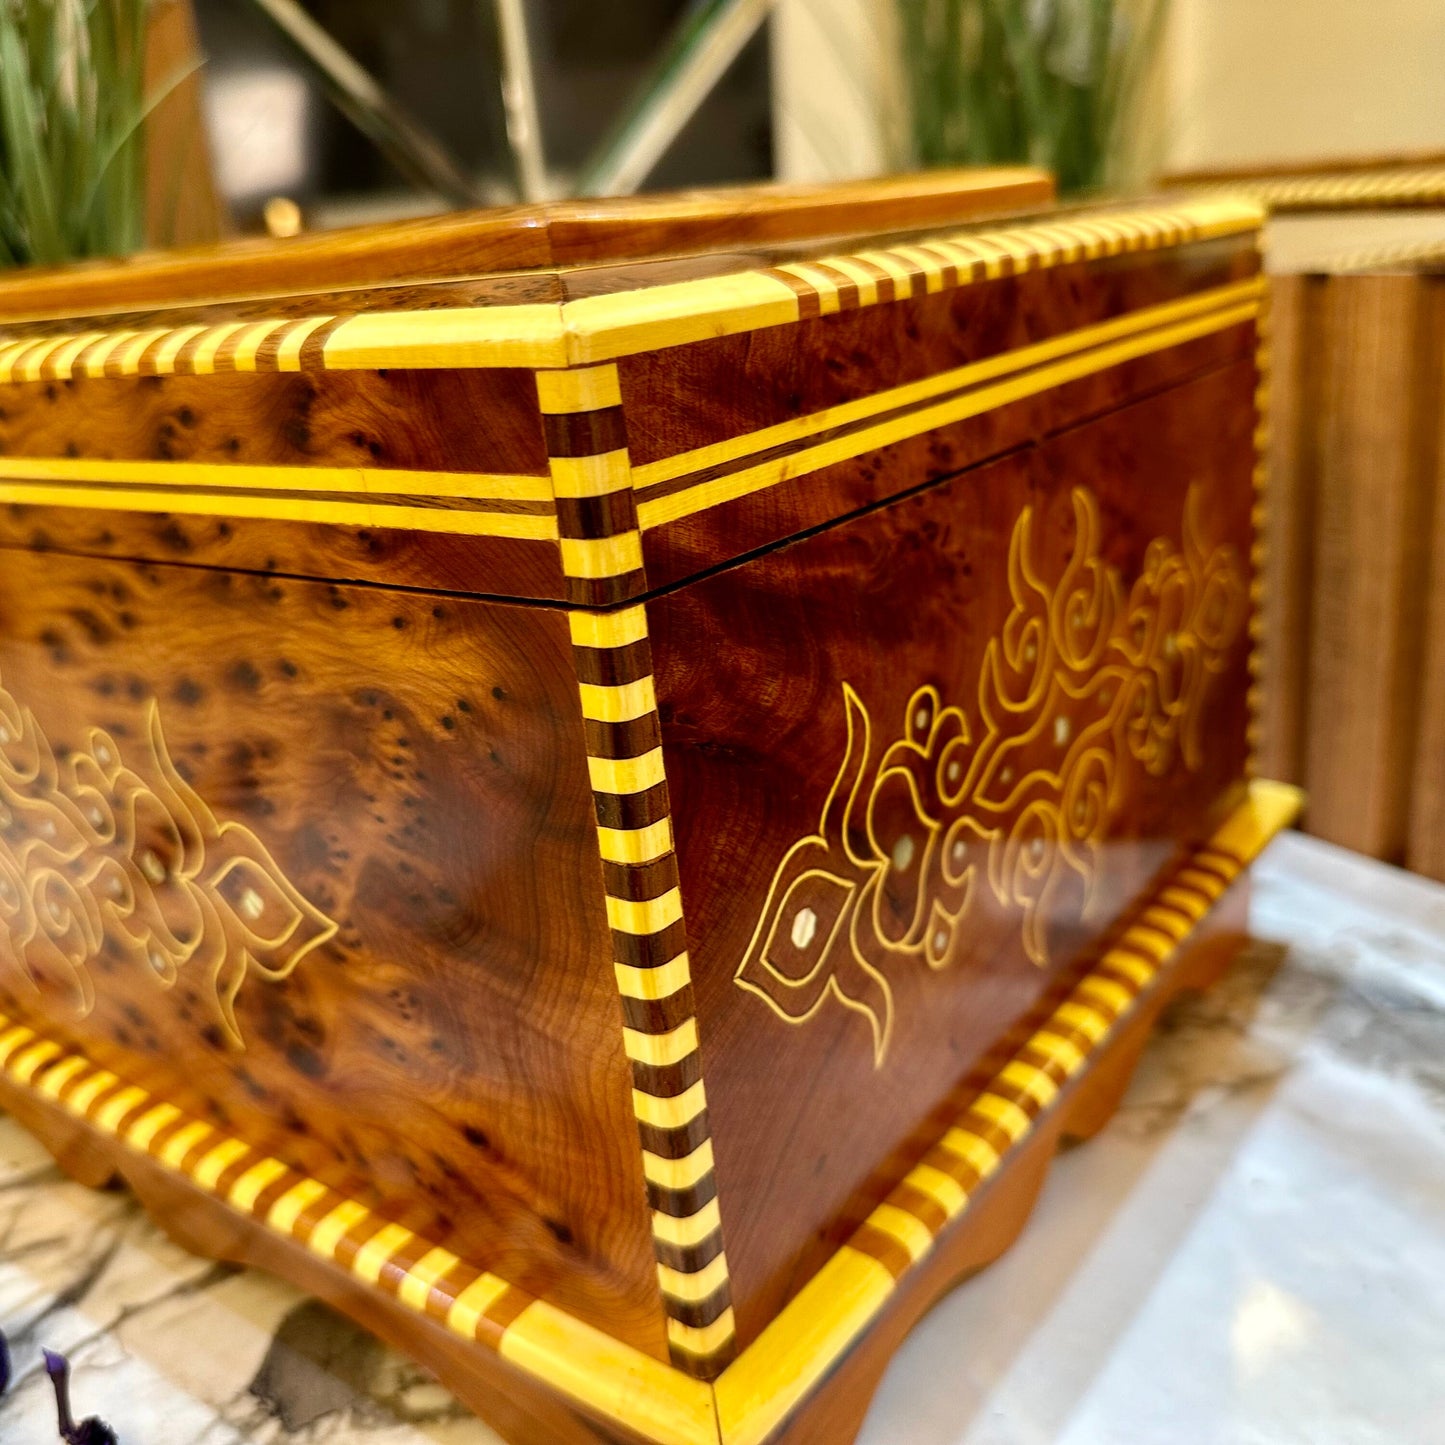 Vintage Wood Jewelry box with mirror inside,Moroccan Solid lockable Box,big Thuya Burl Keepsake Storage box with Mother of pearls inlay